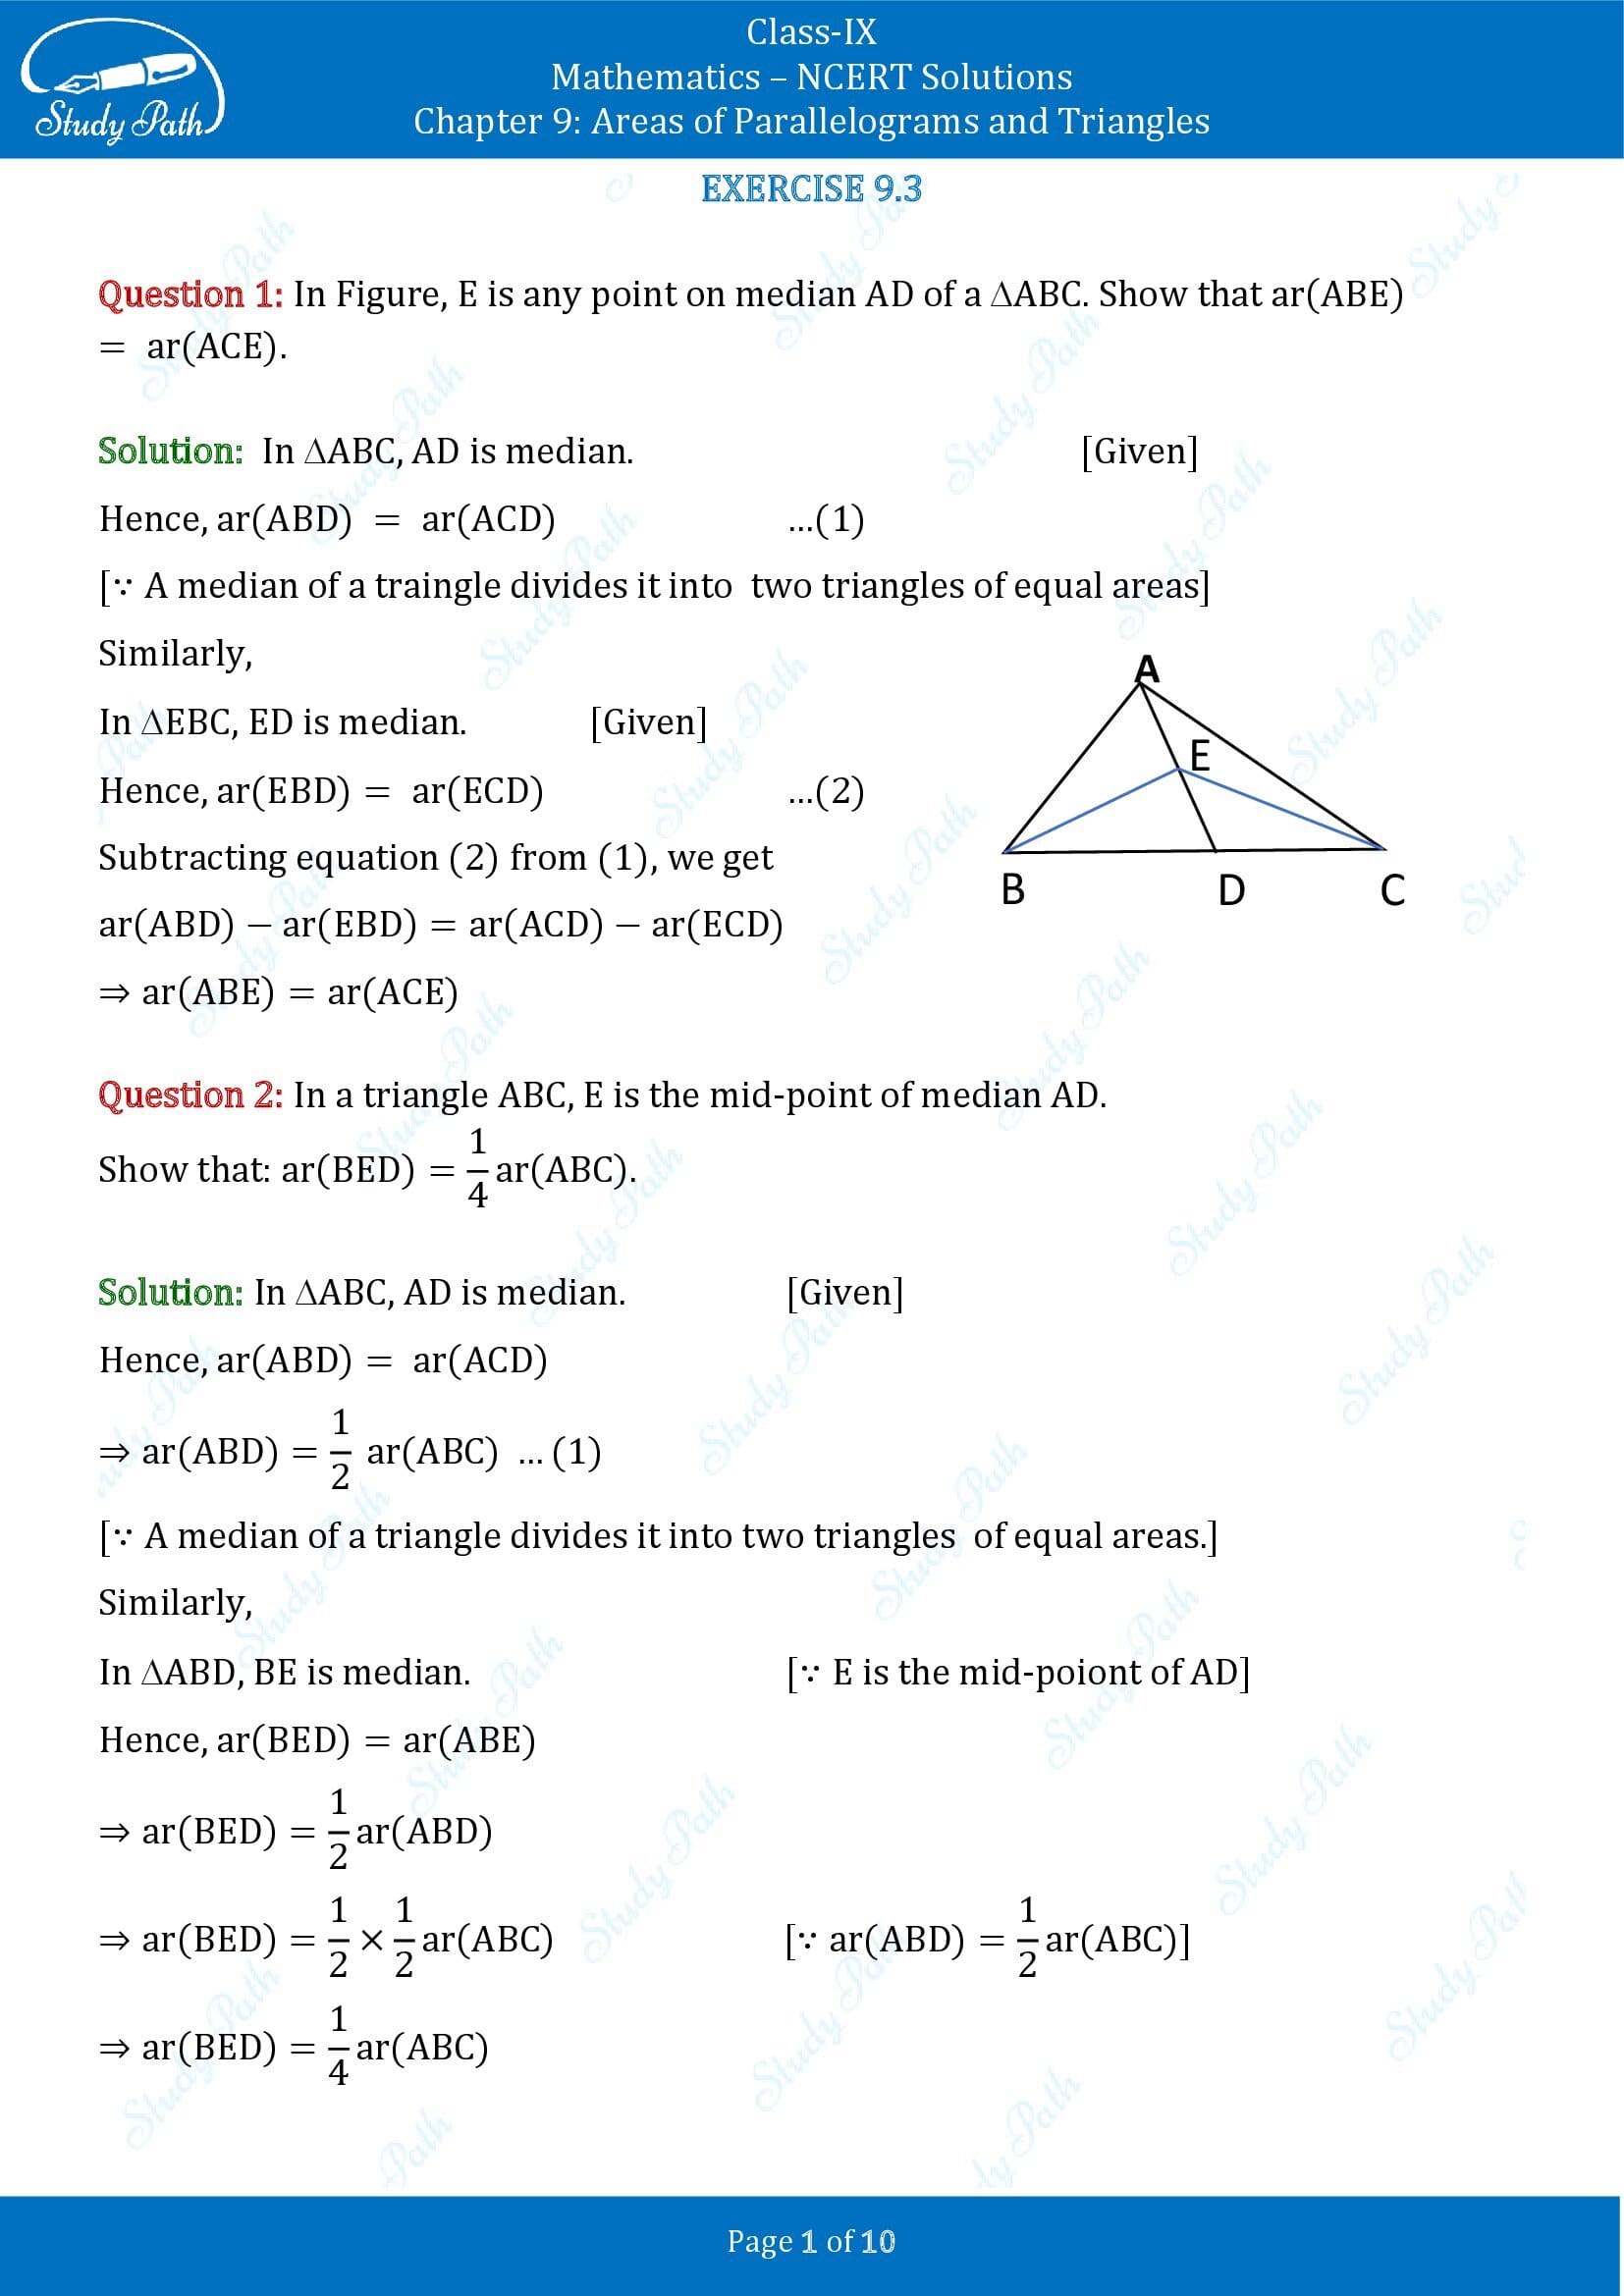 NCERT Solutions for Class 9 Maths Chapter 9 Areas of Parallelograms and Triangles Exercise 9.3 00001